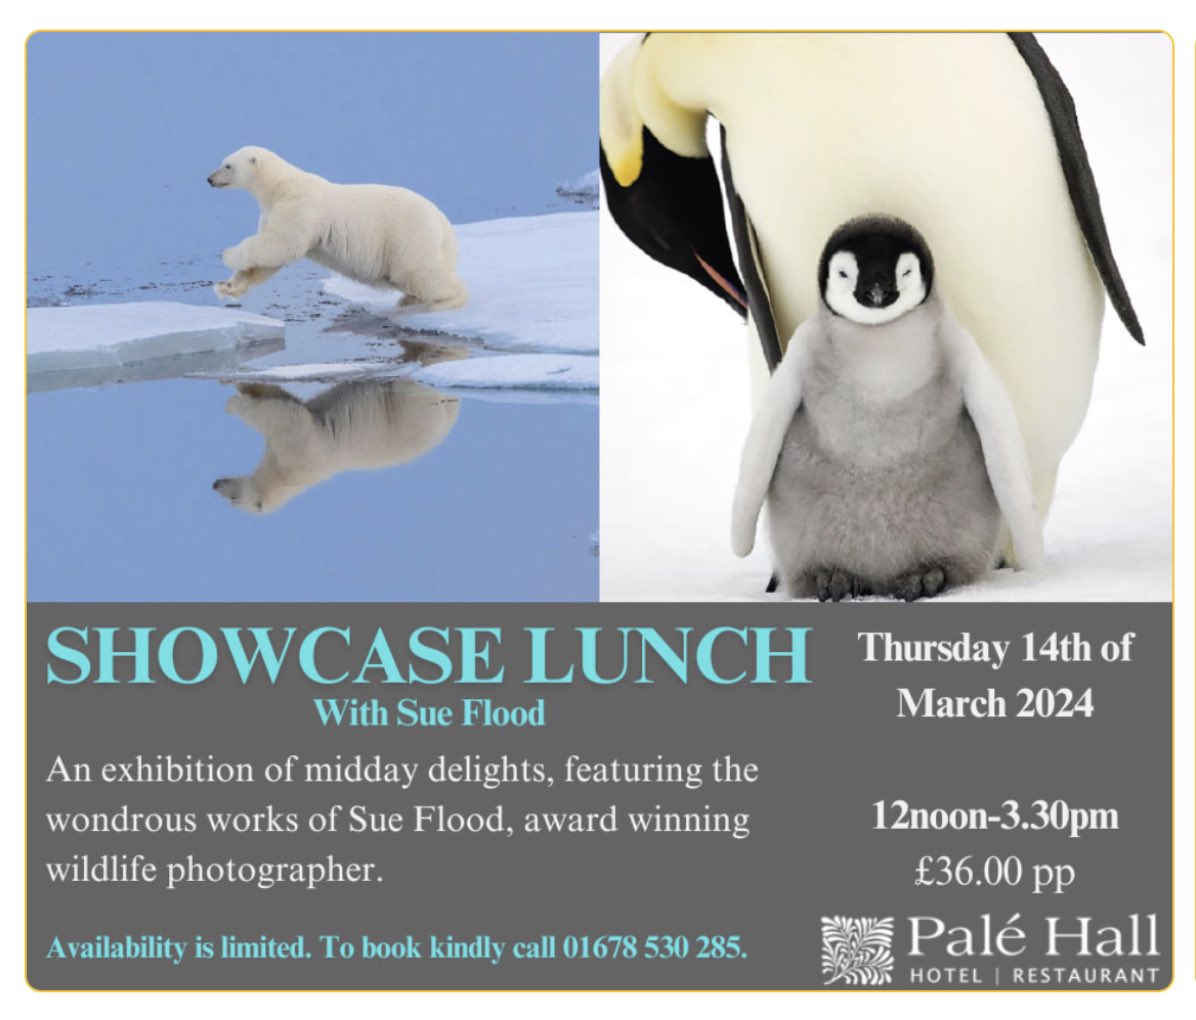 Looking for a special gift and a unique day out in North Wales? I’m speaking about my adventures as a BBC film maker & wildlife photographer at the award-winning Palé Hall Hotel in North Wales. To book please call 01678 530285. Hope to see you there!